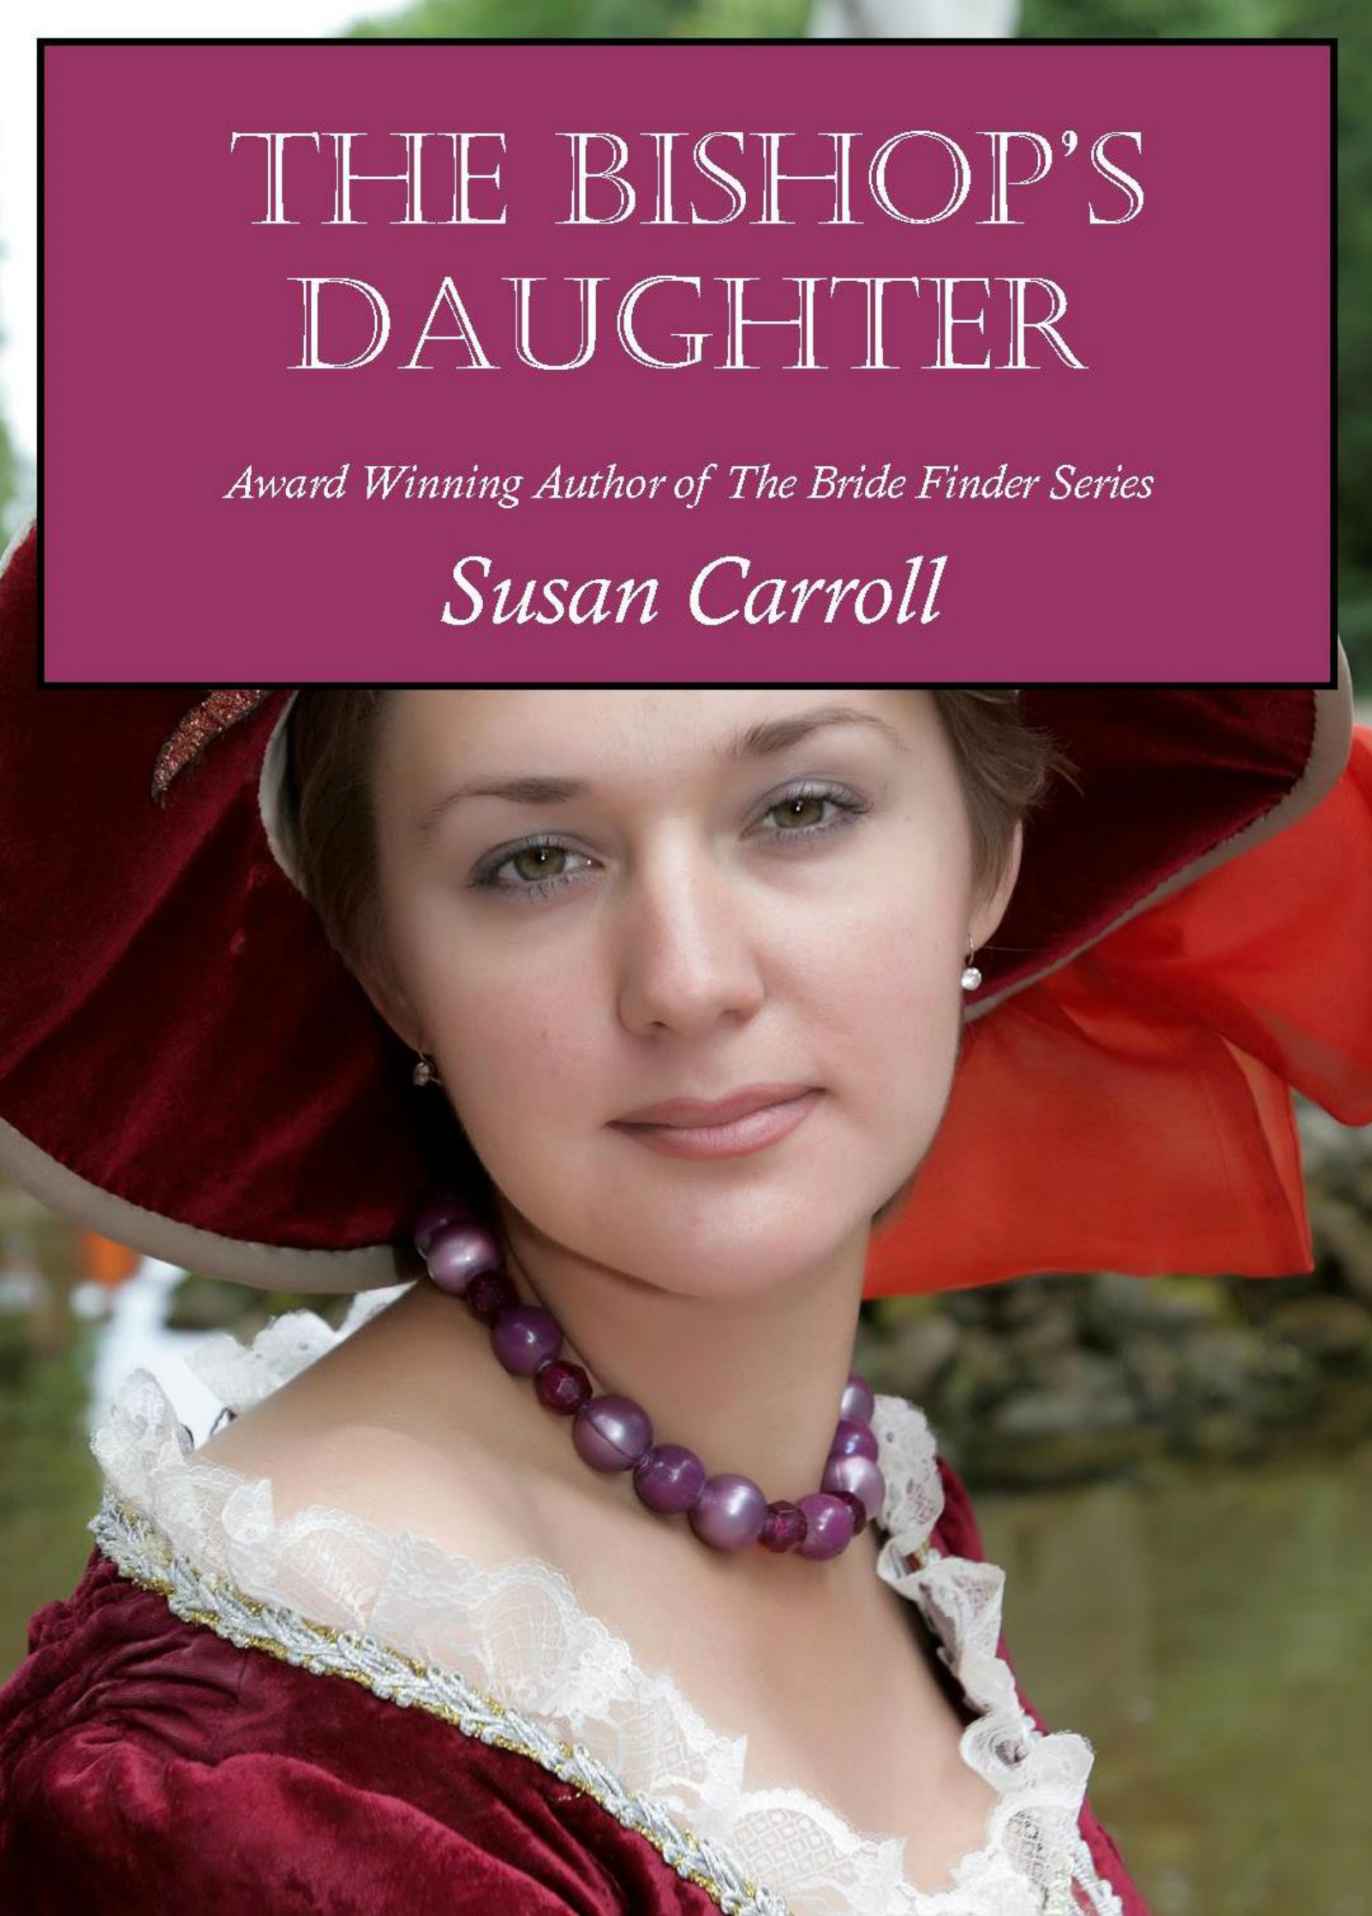 The Bishop's Daughter (2015) by Susan Carroll